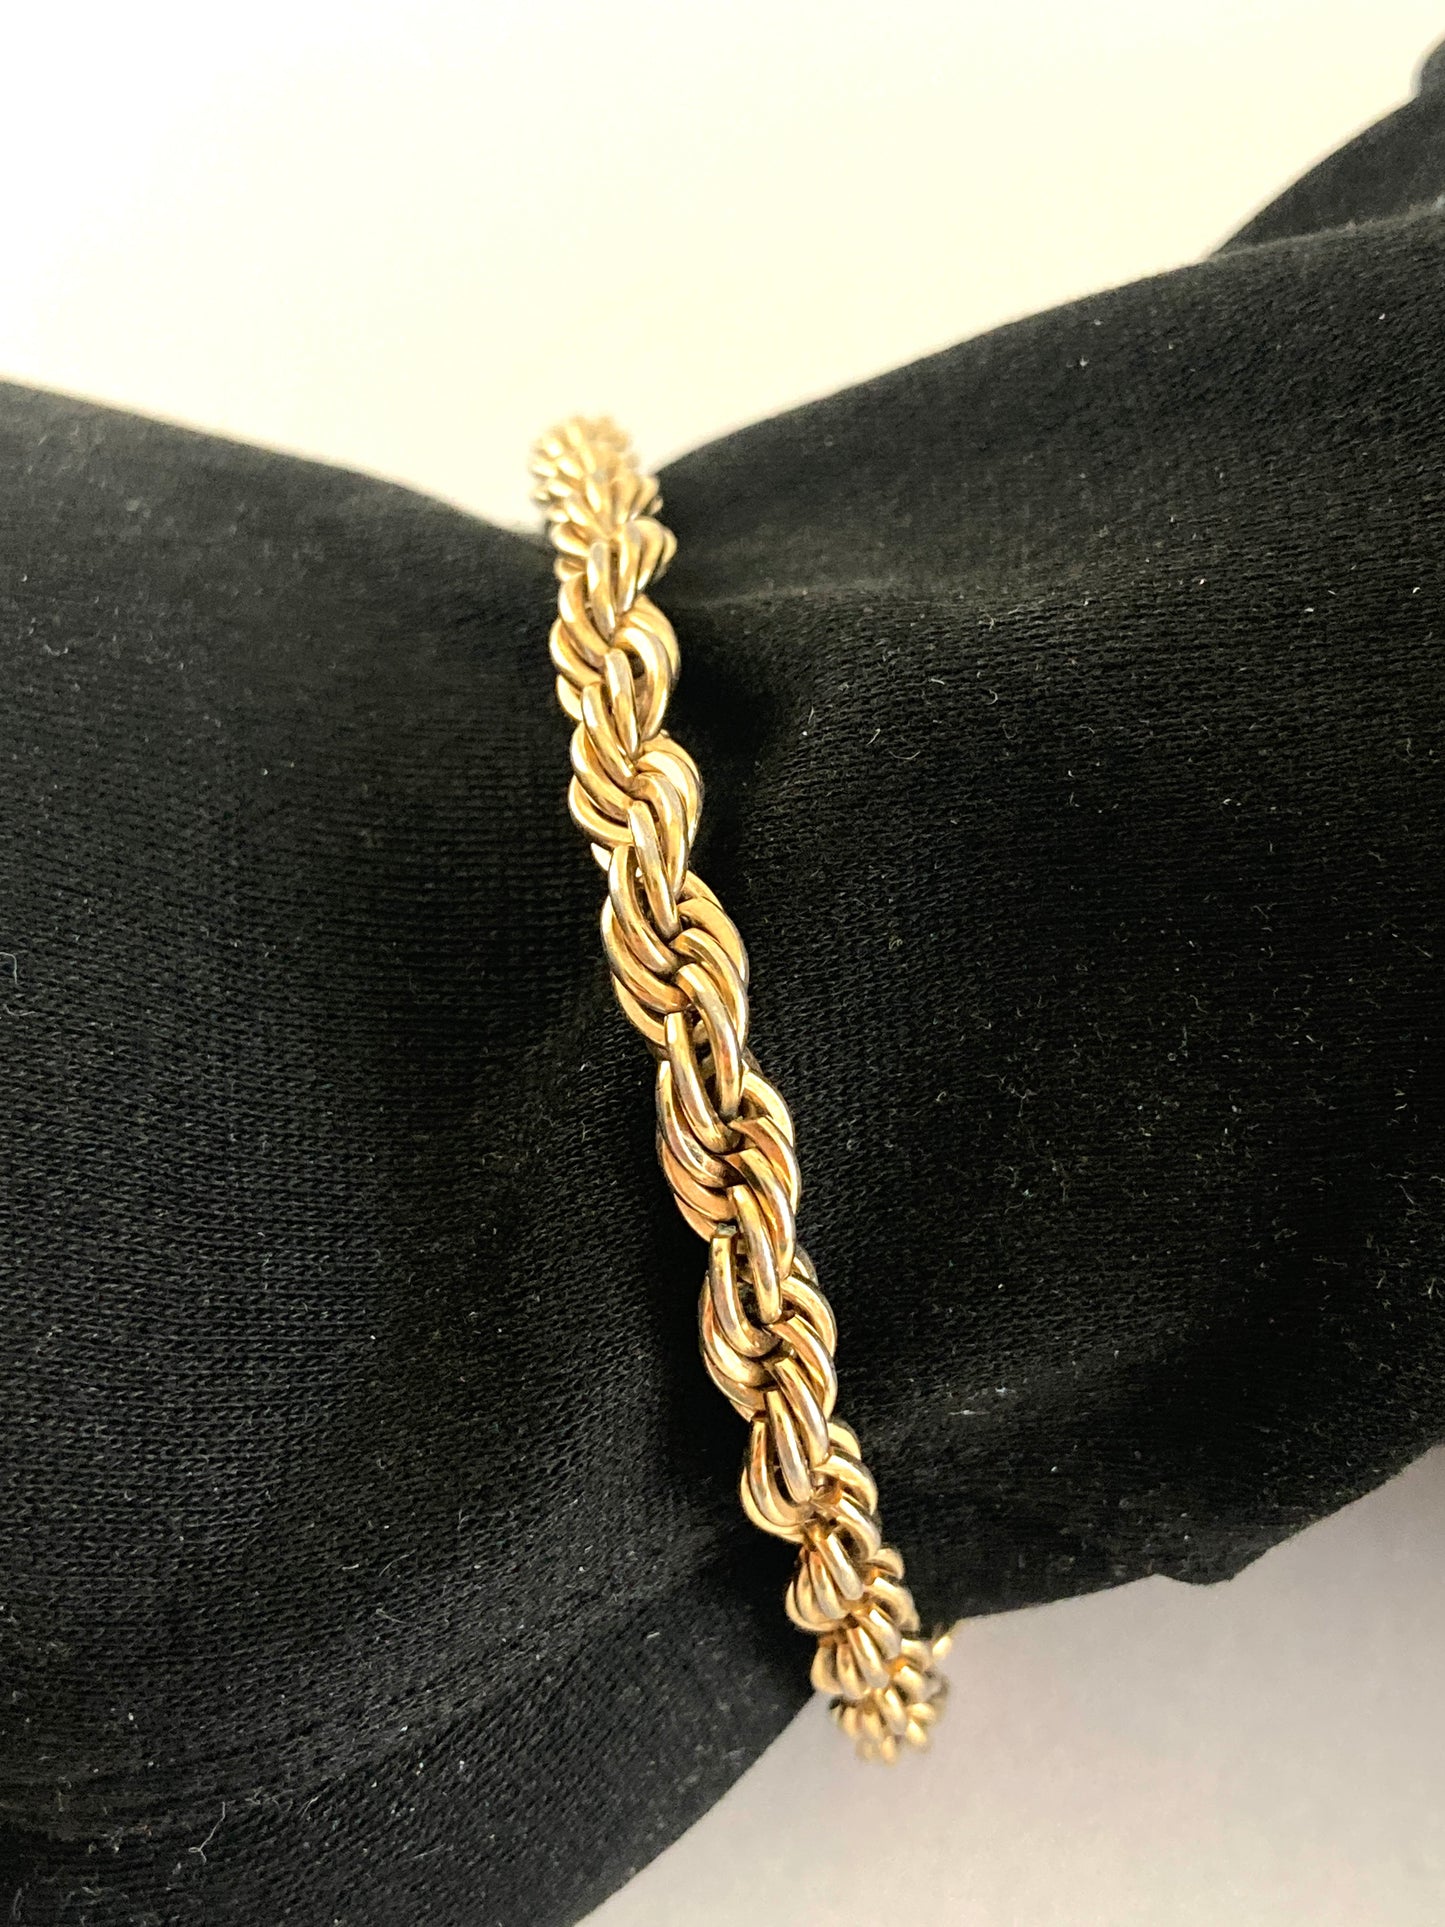 Gold Filled Twisted Rope Chain Bracelet